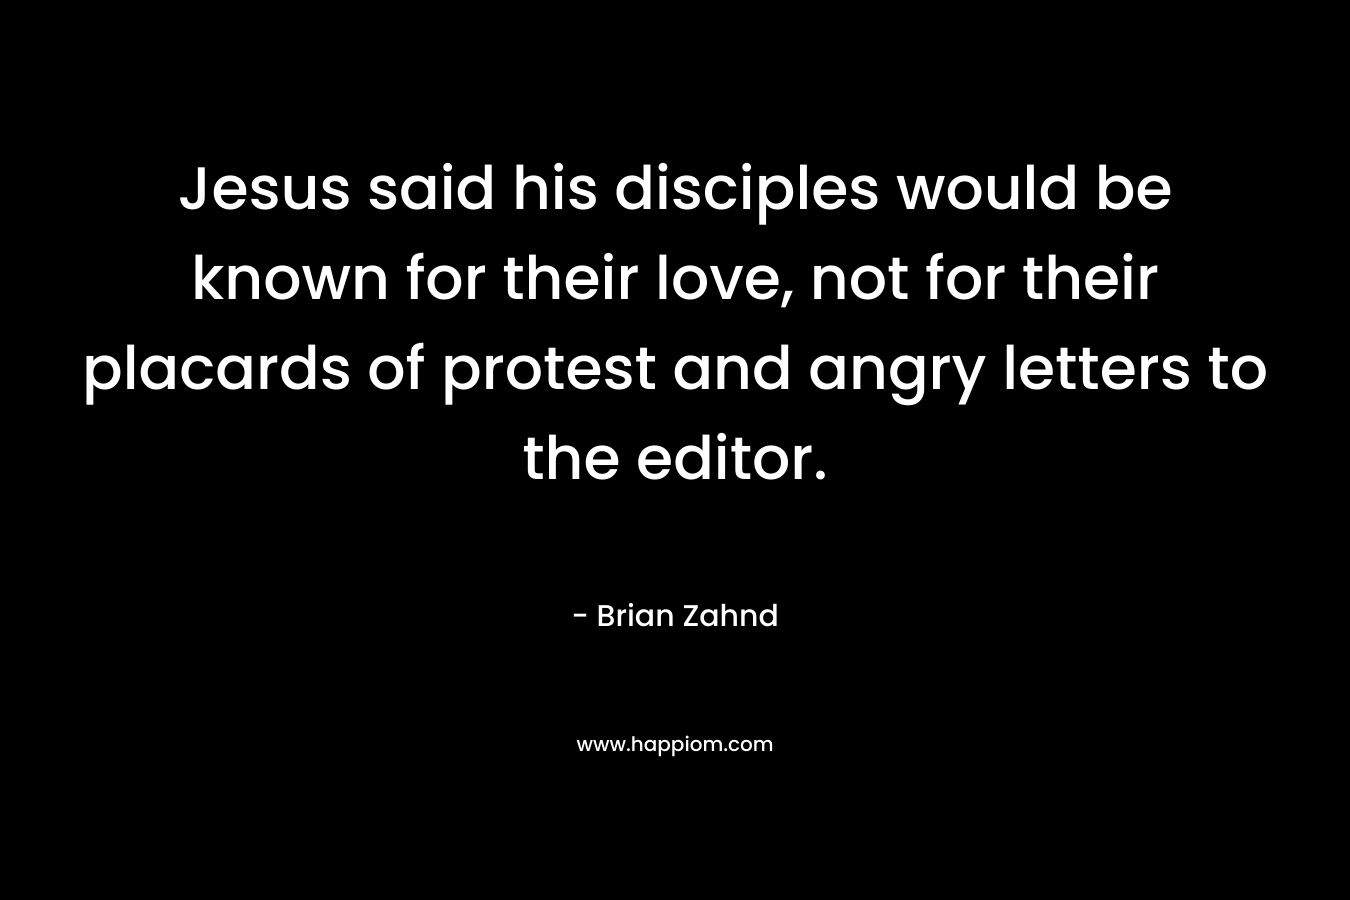 Jesus said his disciples would be known for their love, not for their placards of protest and angry letters to the editor.